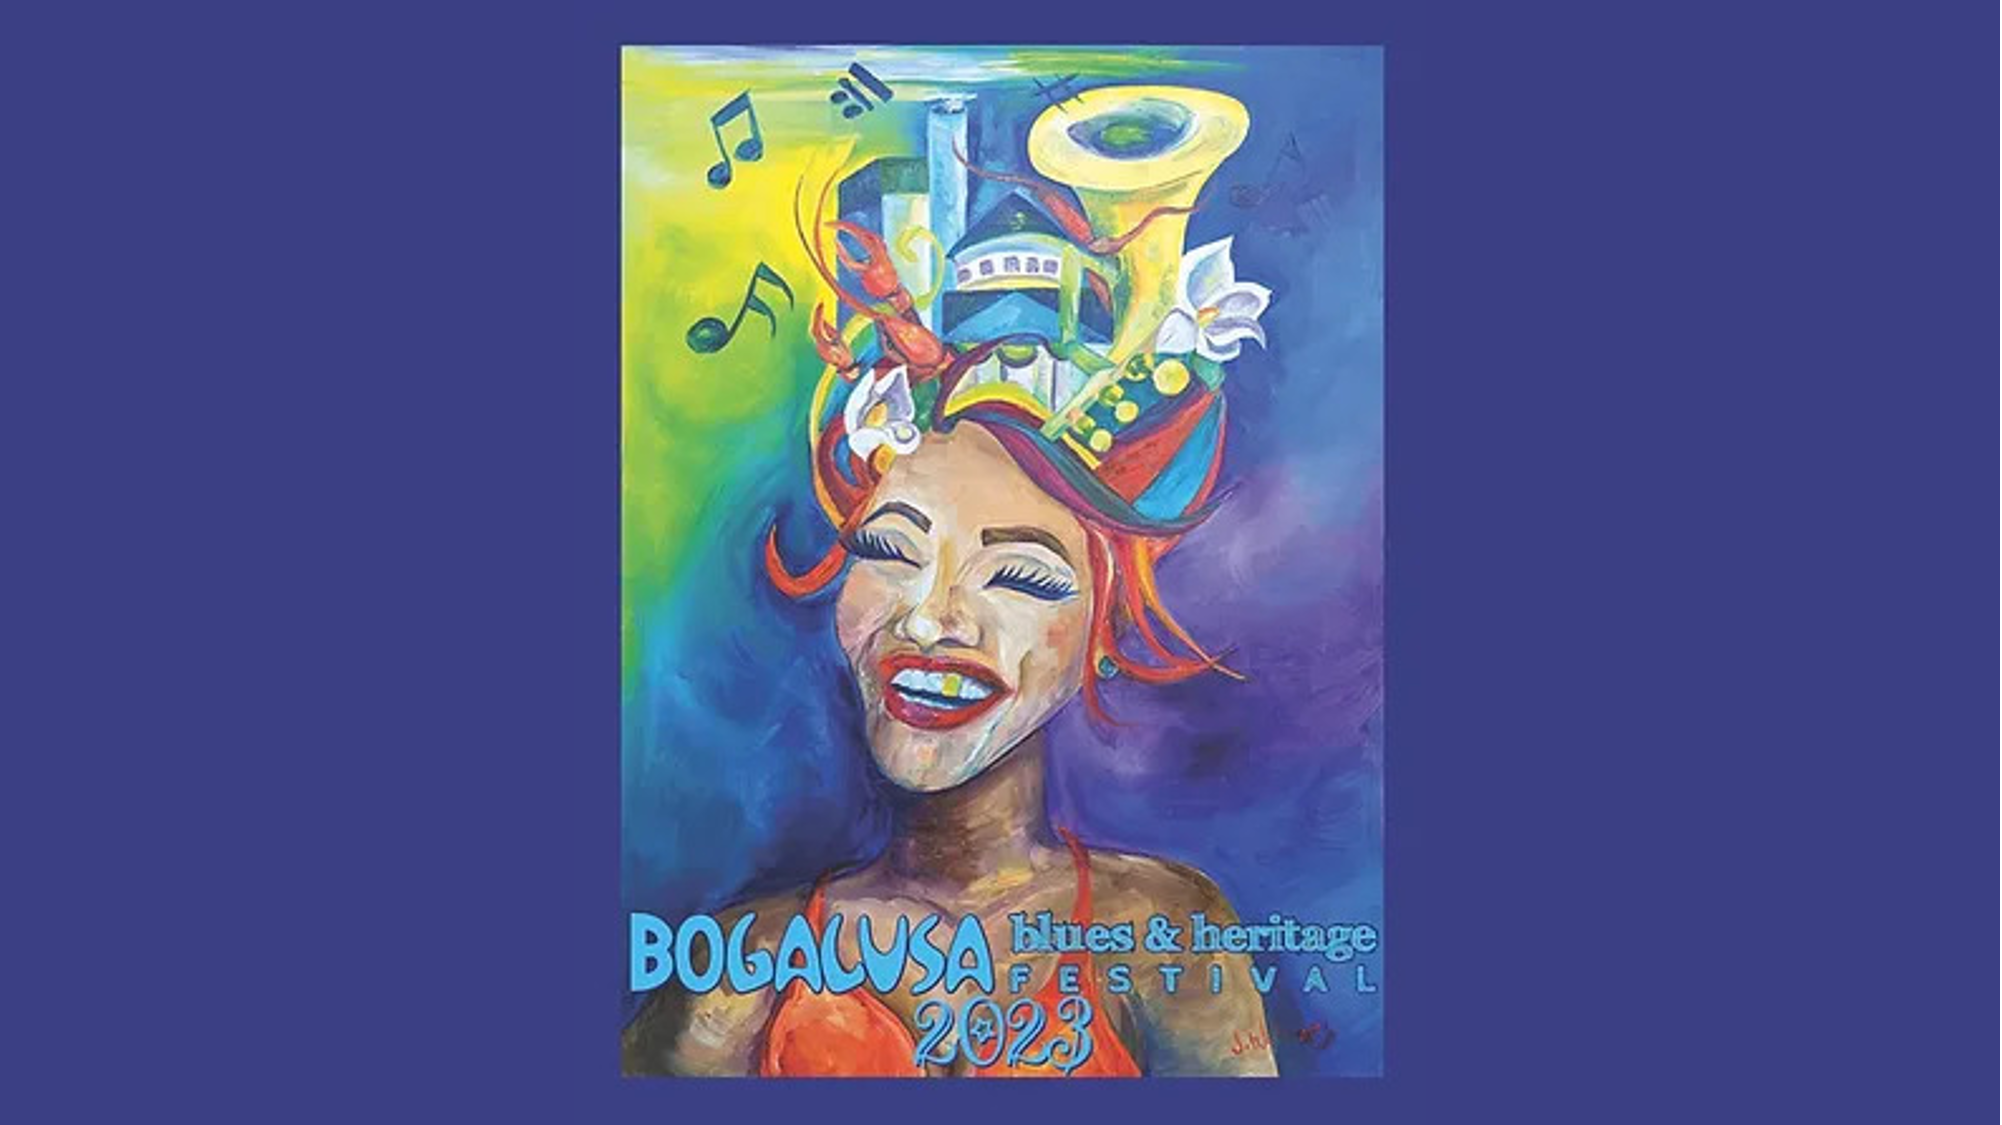 The Bogalusa Blues & Heritage Festival 2023 poster by local artist Jessica Williams.